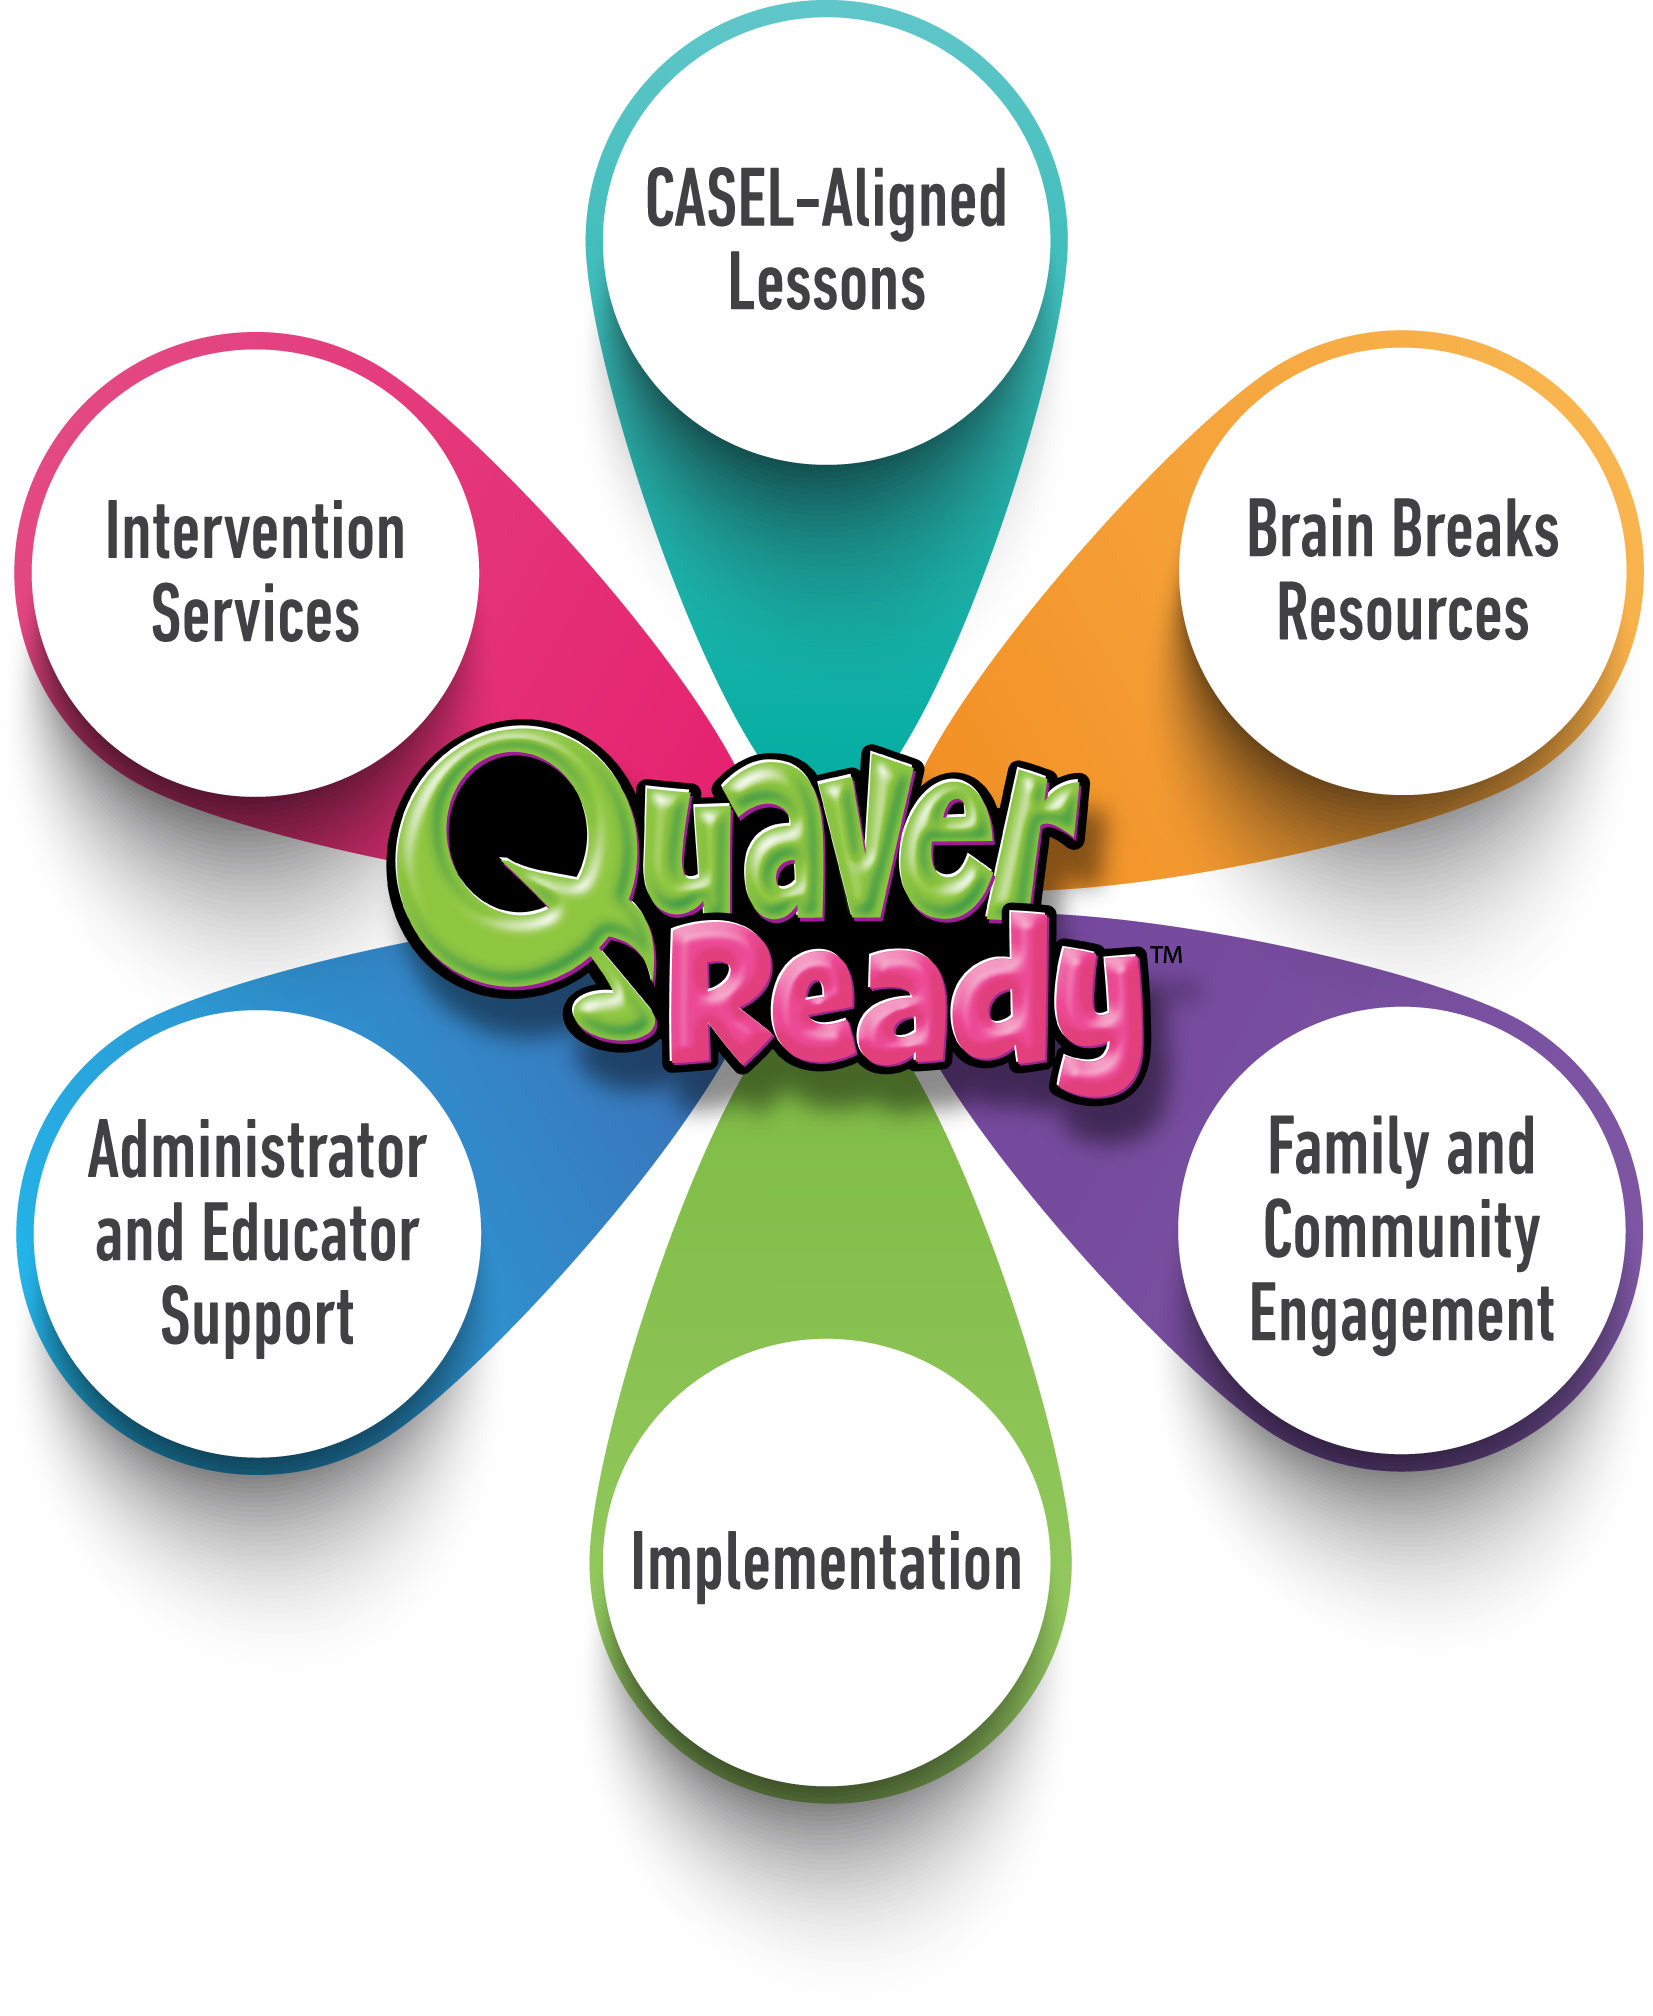 Quaver Ready includes various tools and resources to help educators instill SEL skill in their students